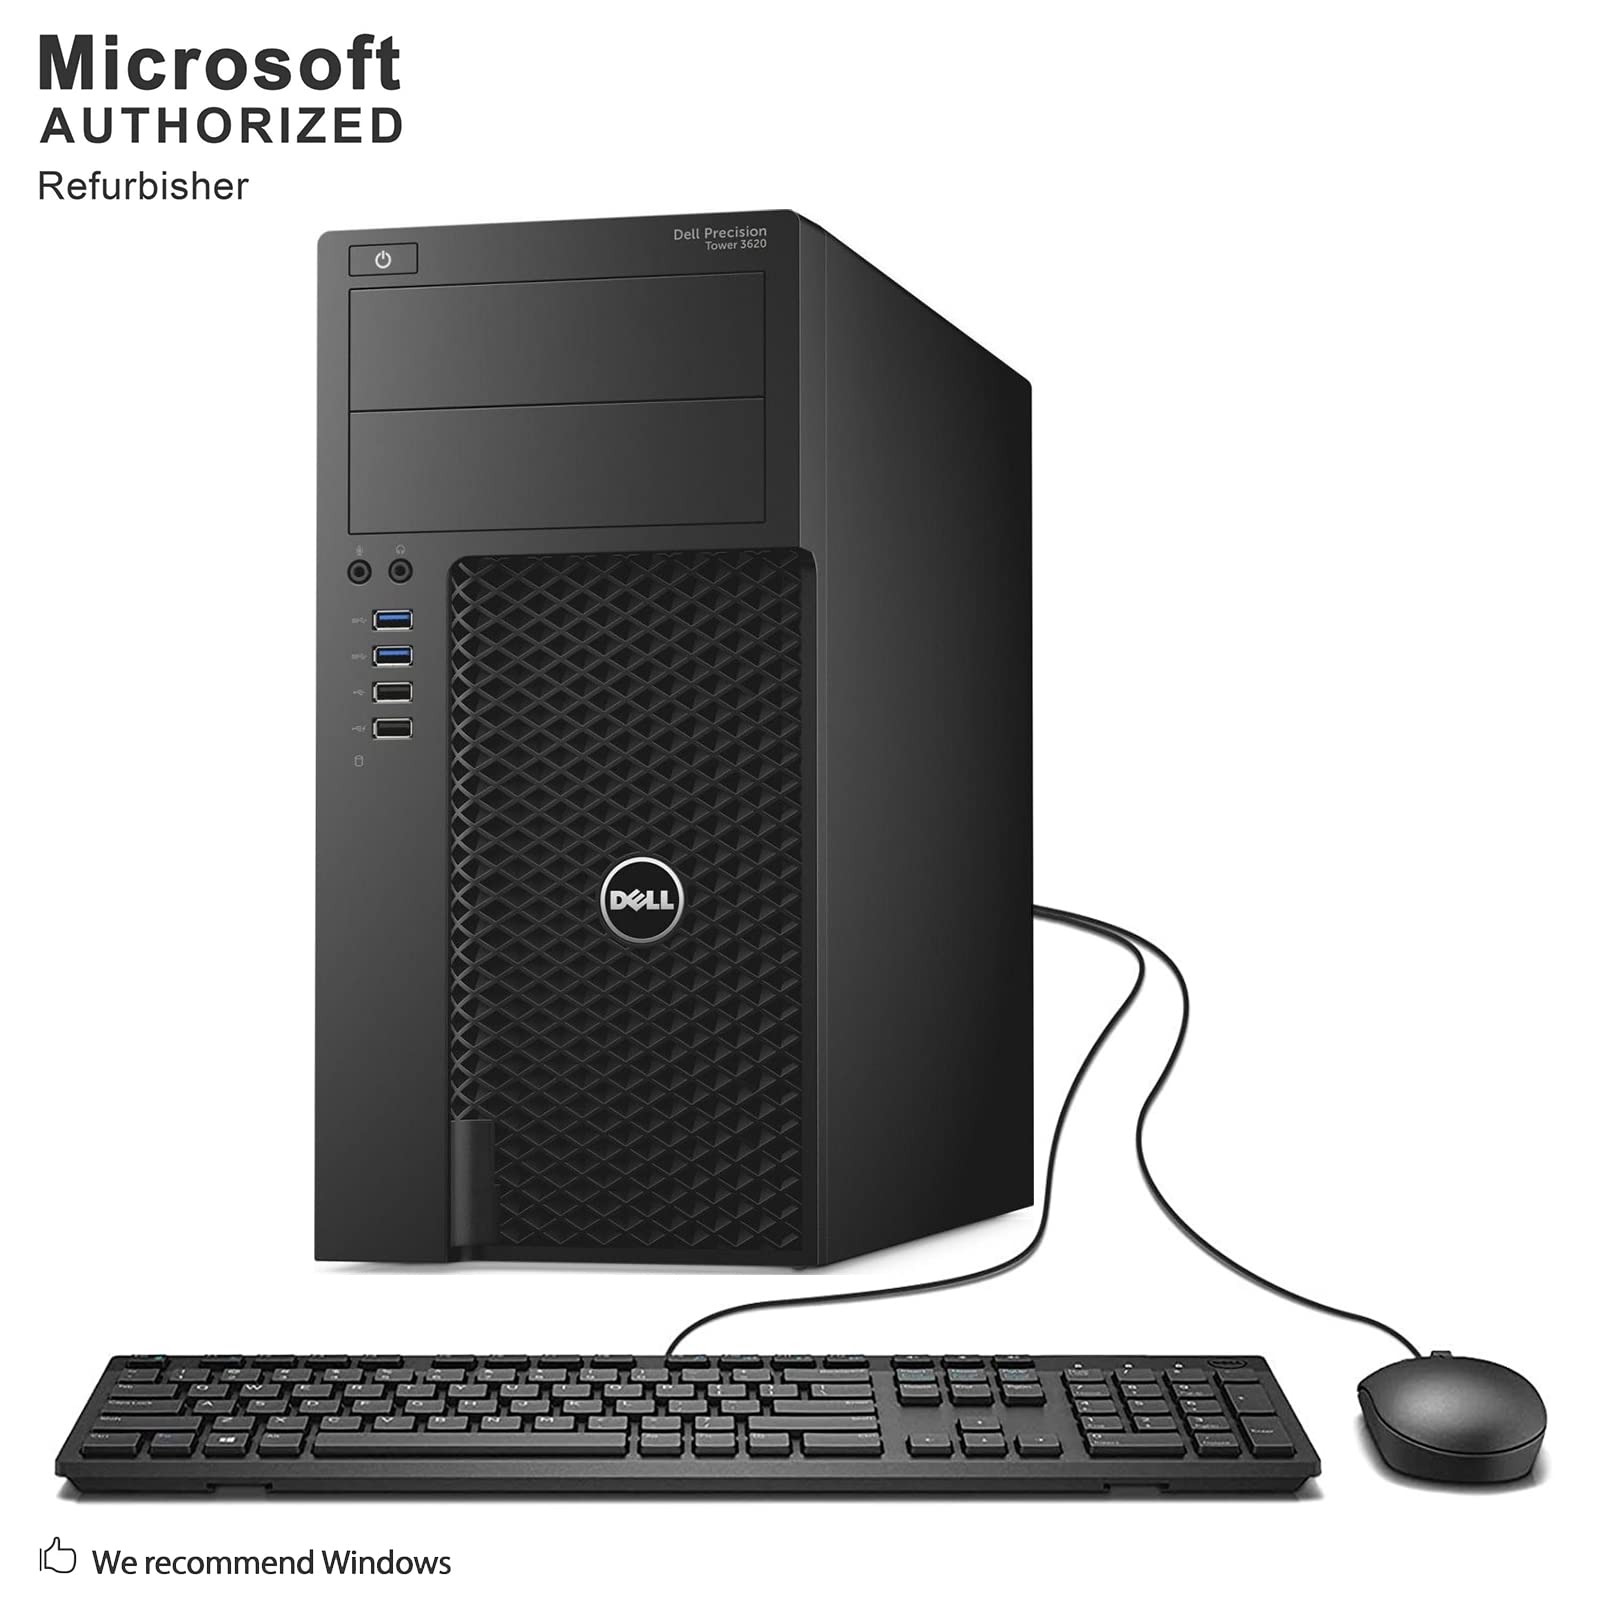 Dell Precision 3620 Tower Busines PC, Intel Quad Core i7-6700 up to 4.0GHz, 16G DDR4, 512G SSD, HDMI, DisplayPort, Windows 10 Pro 64 Bit-Multi-Language Supports English/Spanish/French(Renewed)